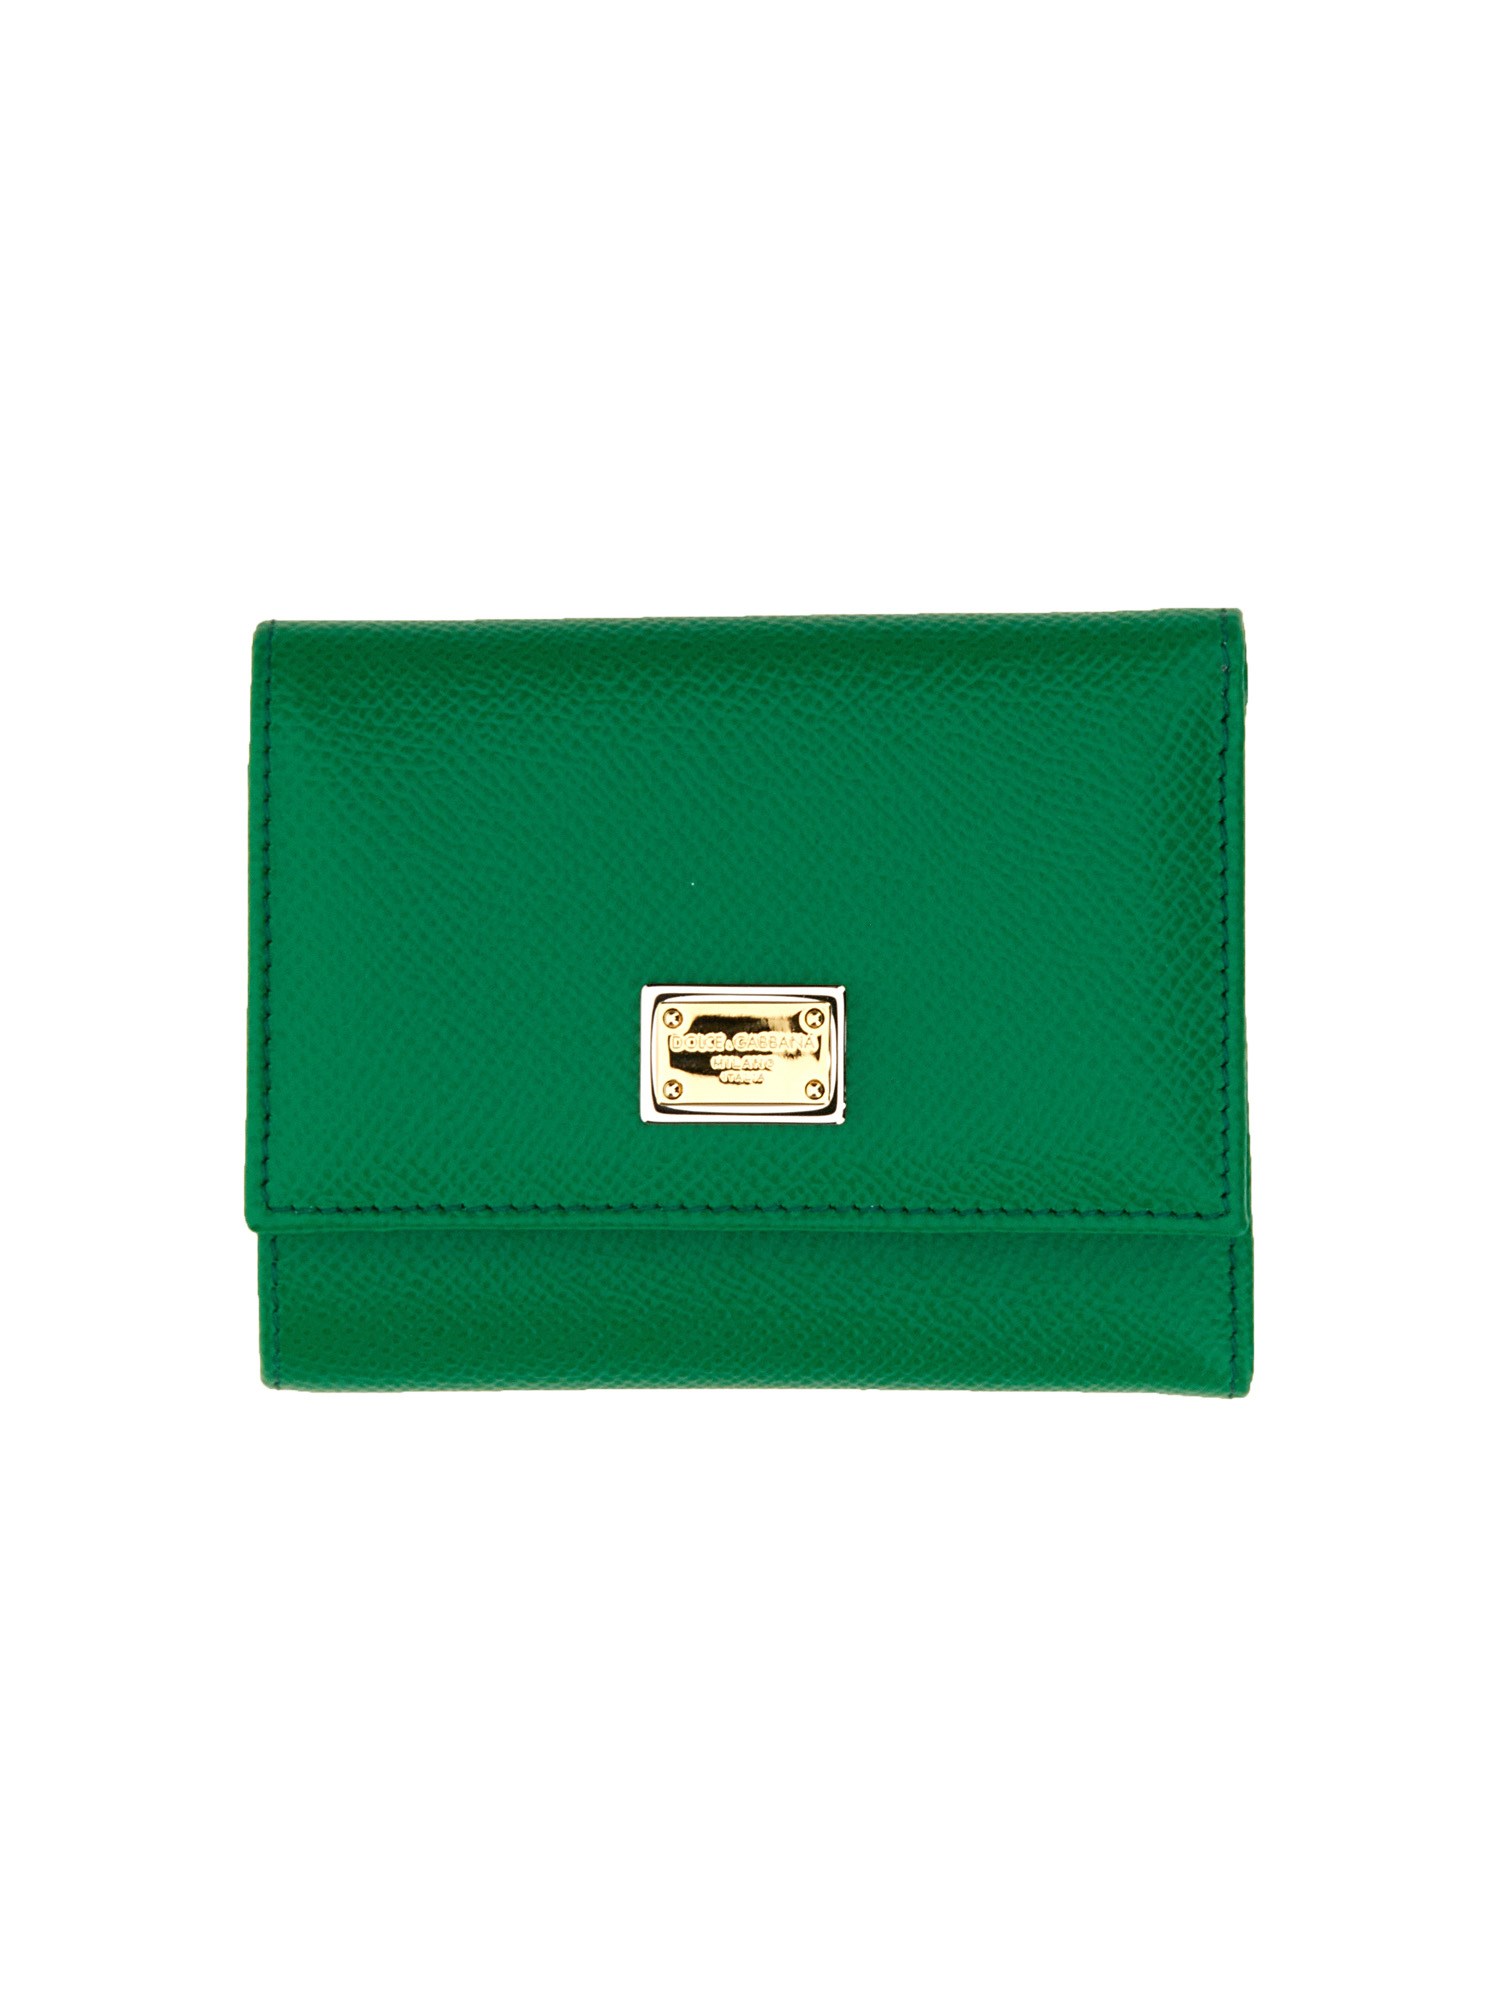 Dolce & Gabbana Small Leather Wallet In Green